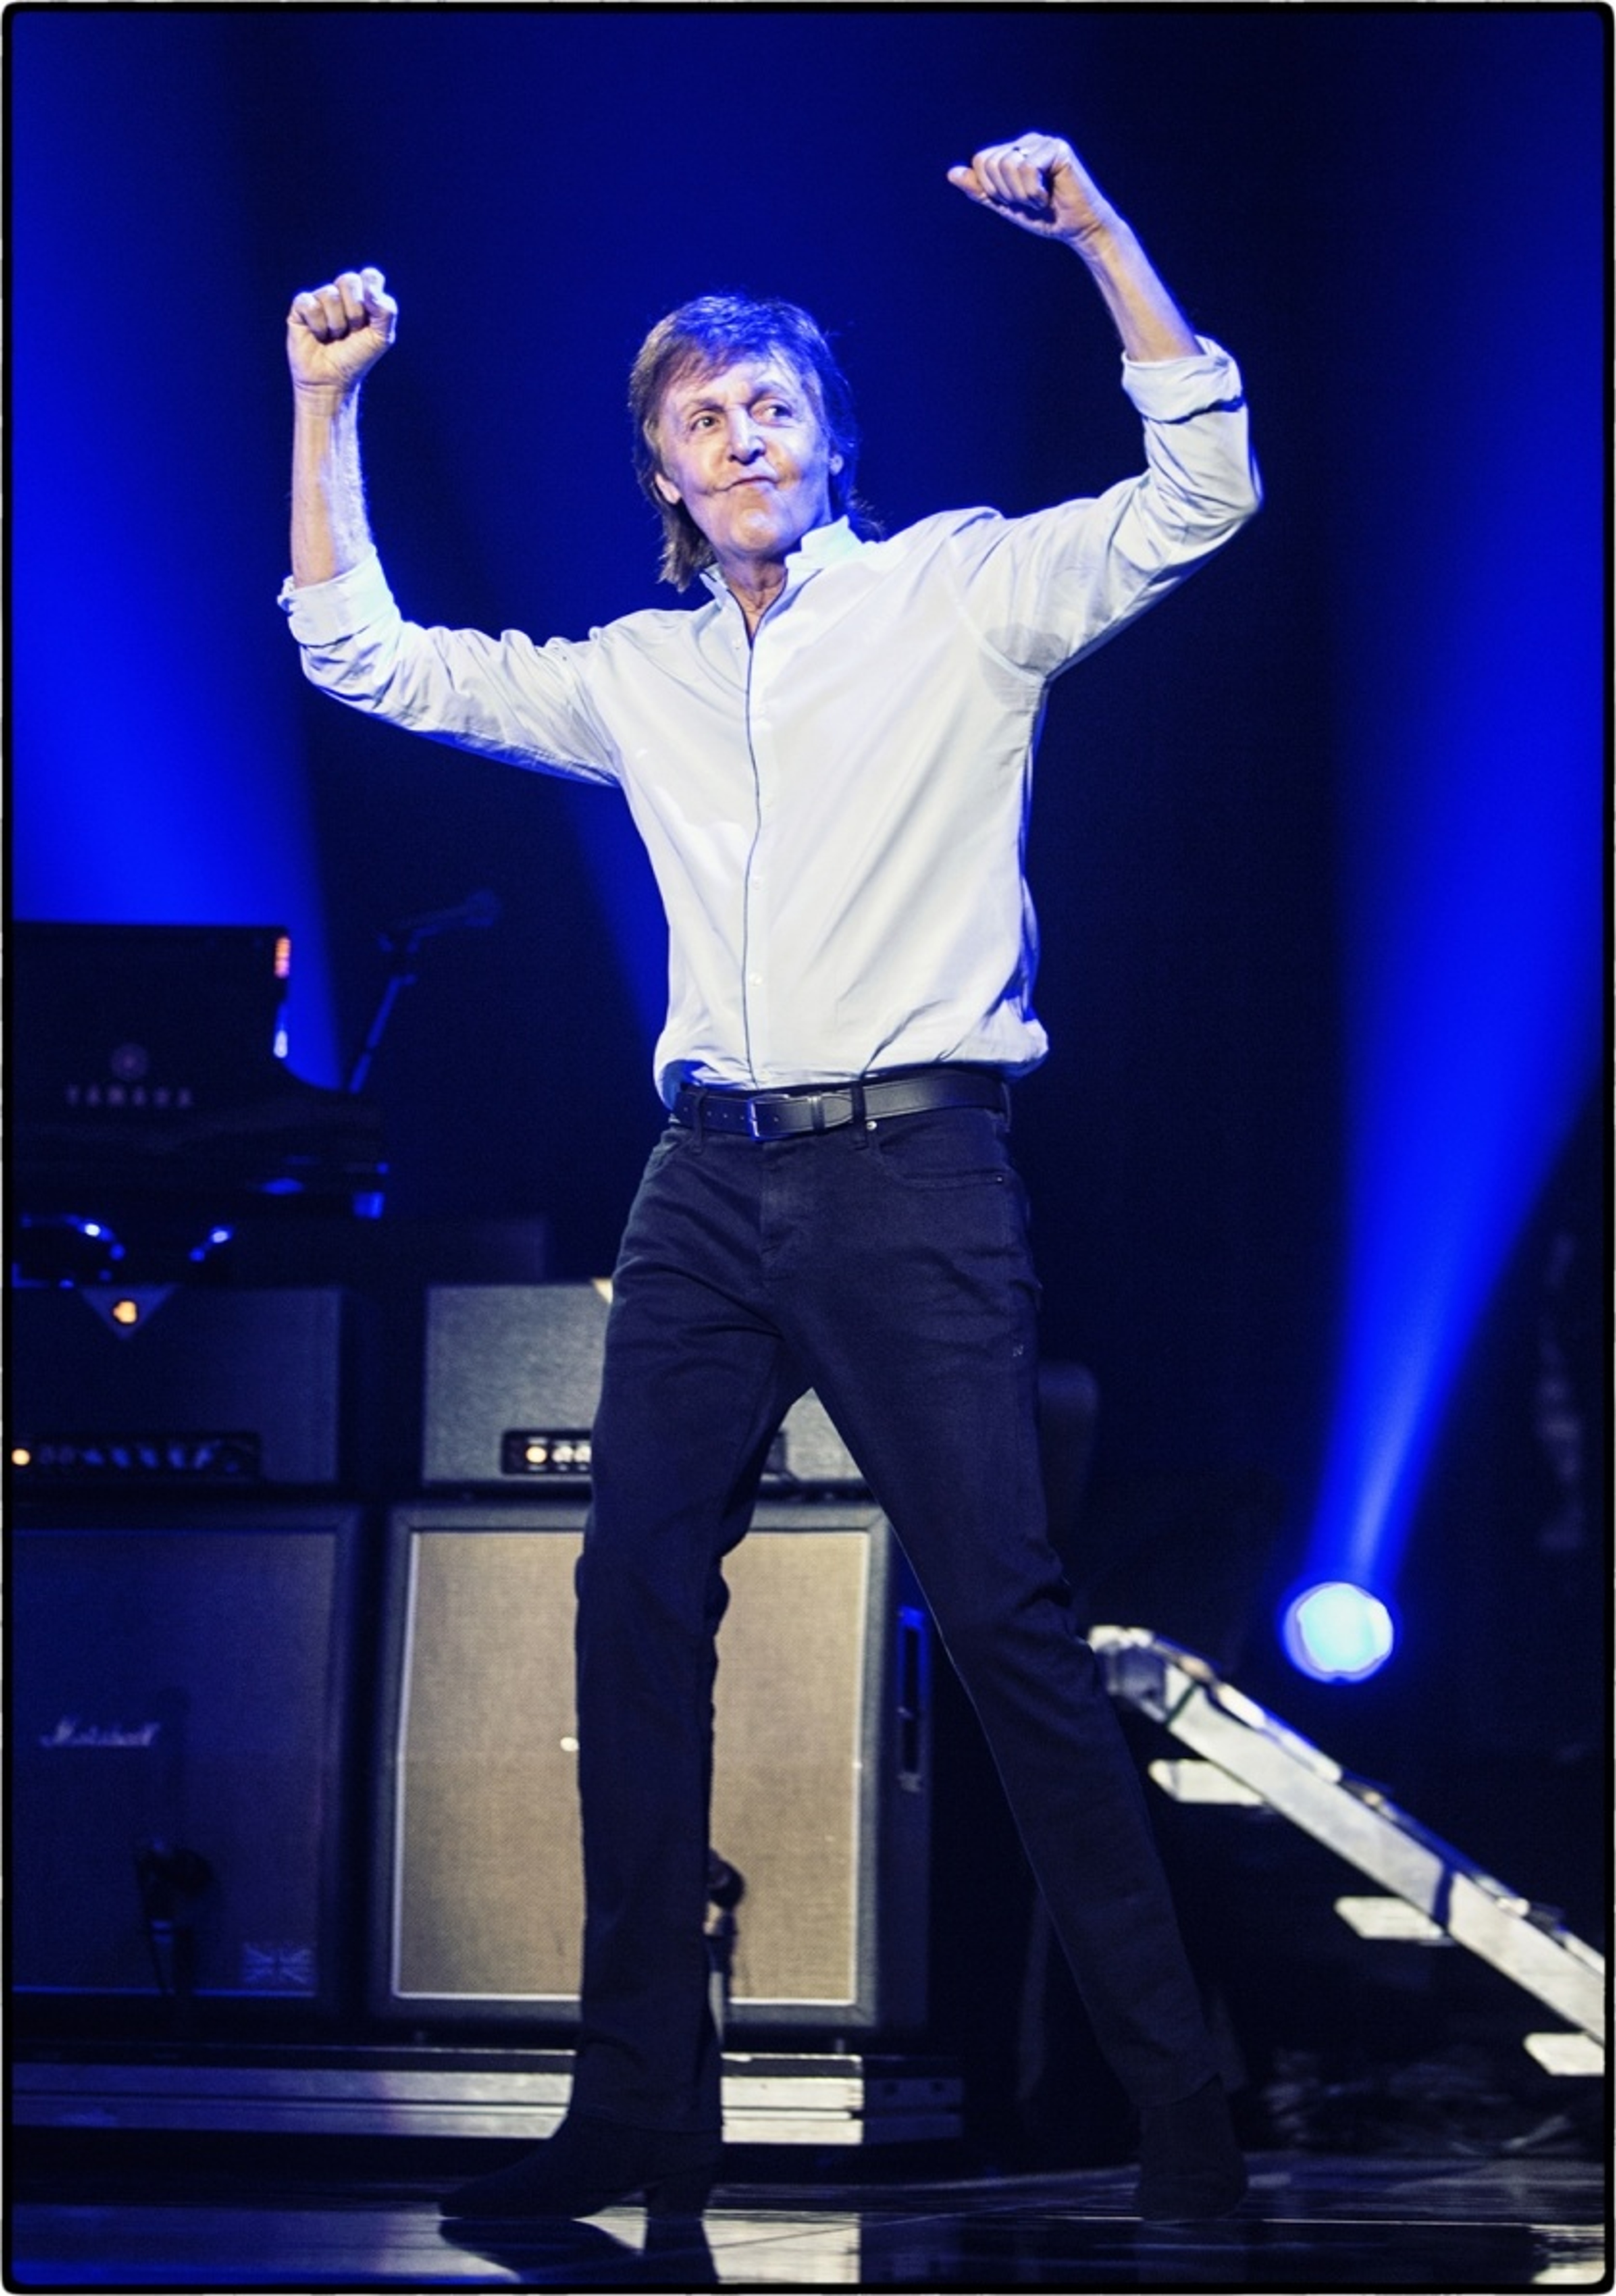 Paul during the 'One On One' tour at the Key Arena, Seattle